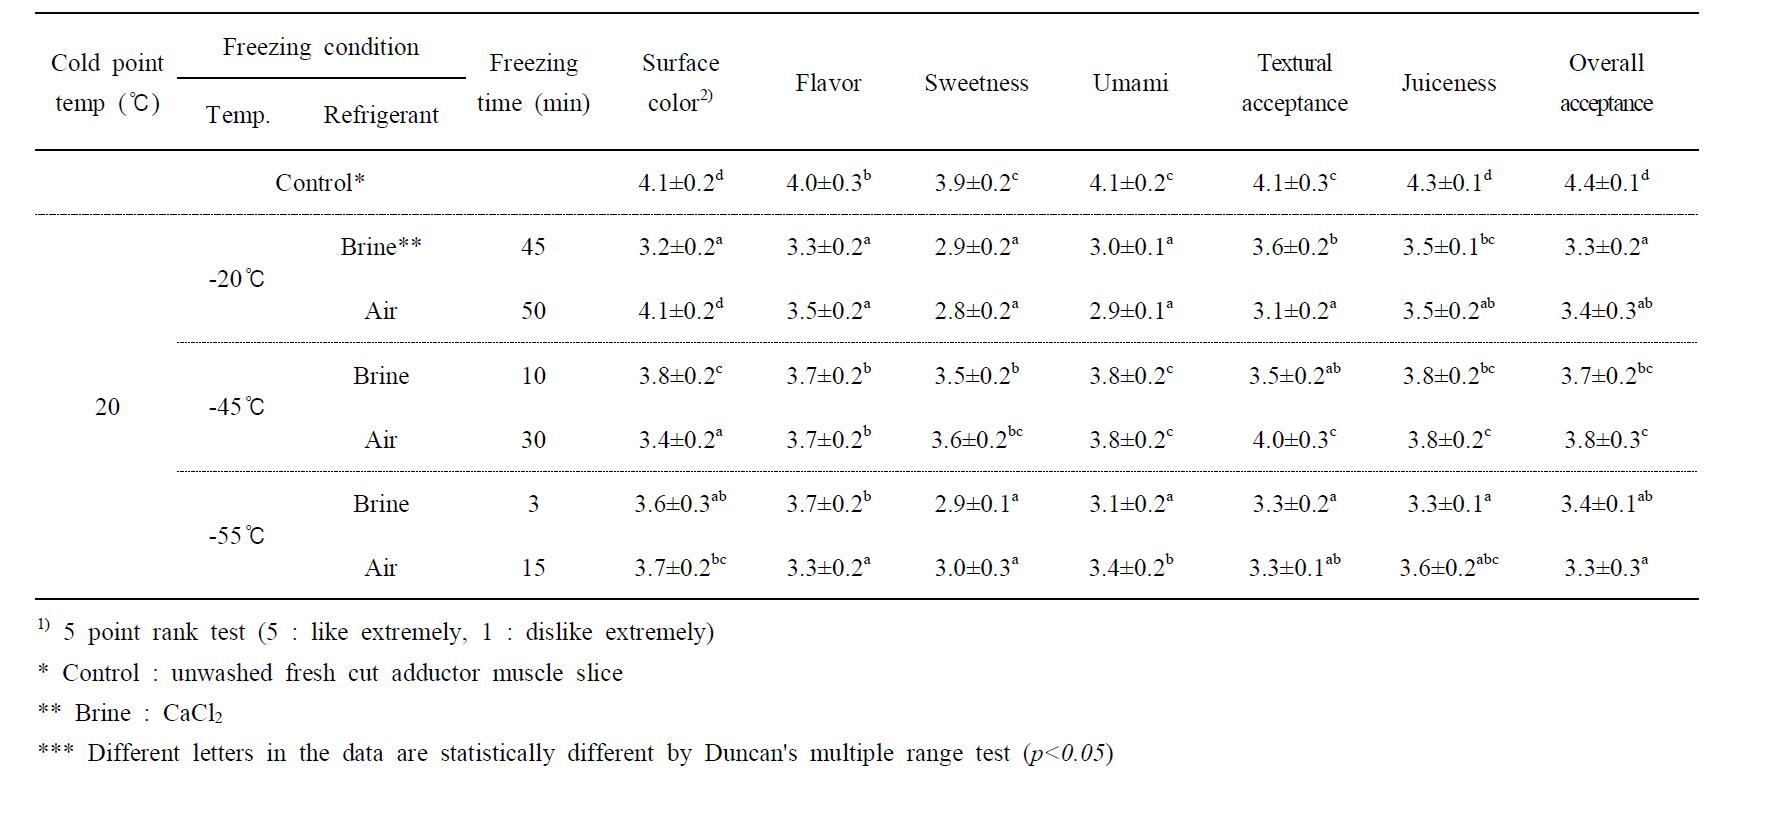 Influence of freezing rate on the sensory properties of pen-shell adductor muscle1)